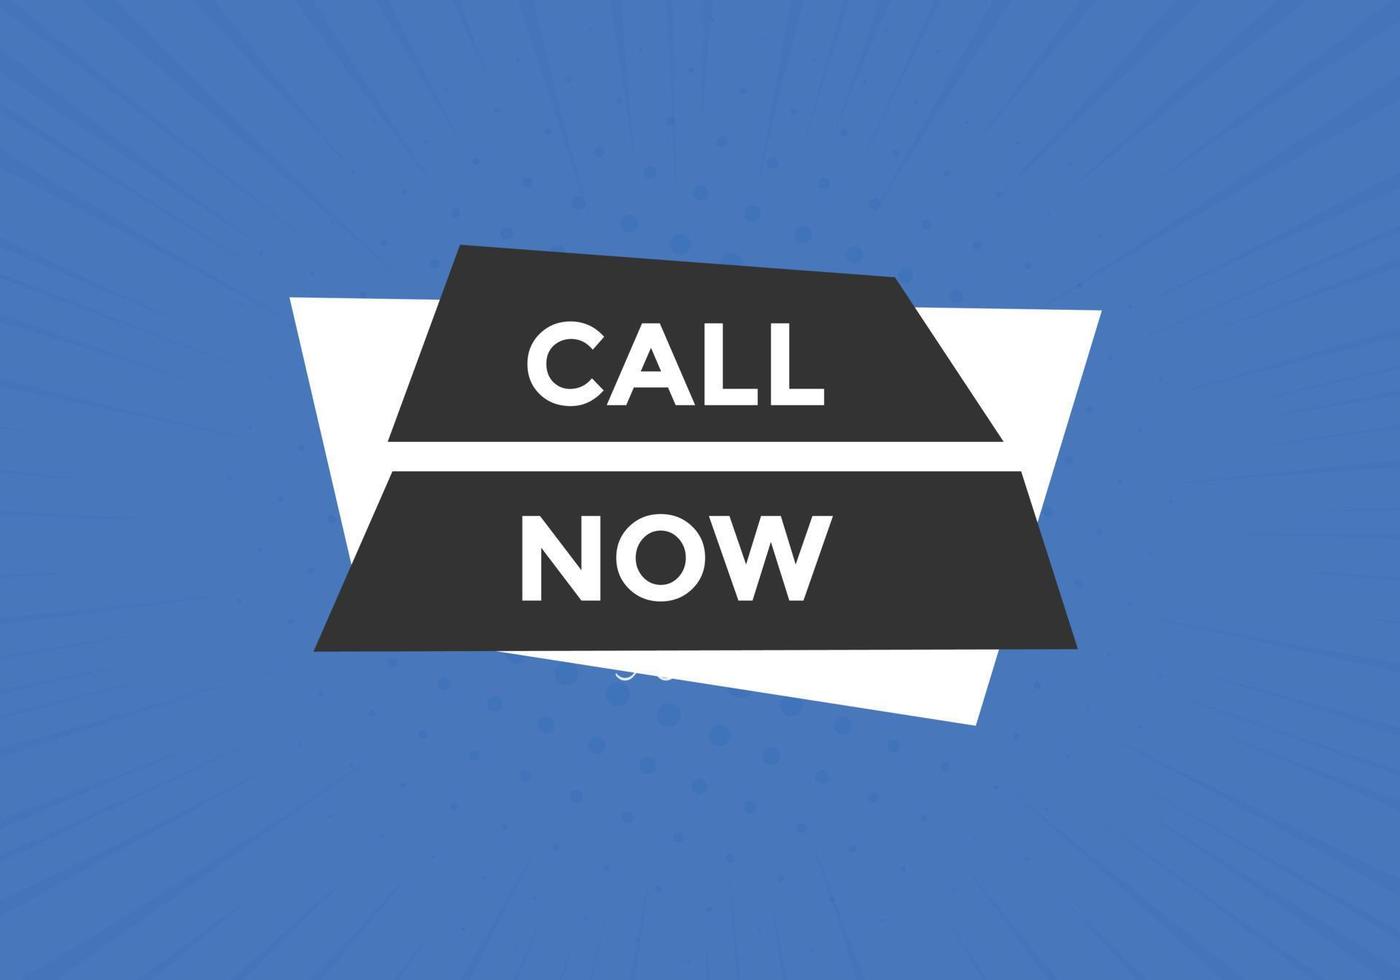 Call now button.call now text web template. Sign icon banner vector